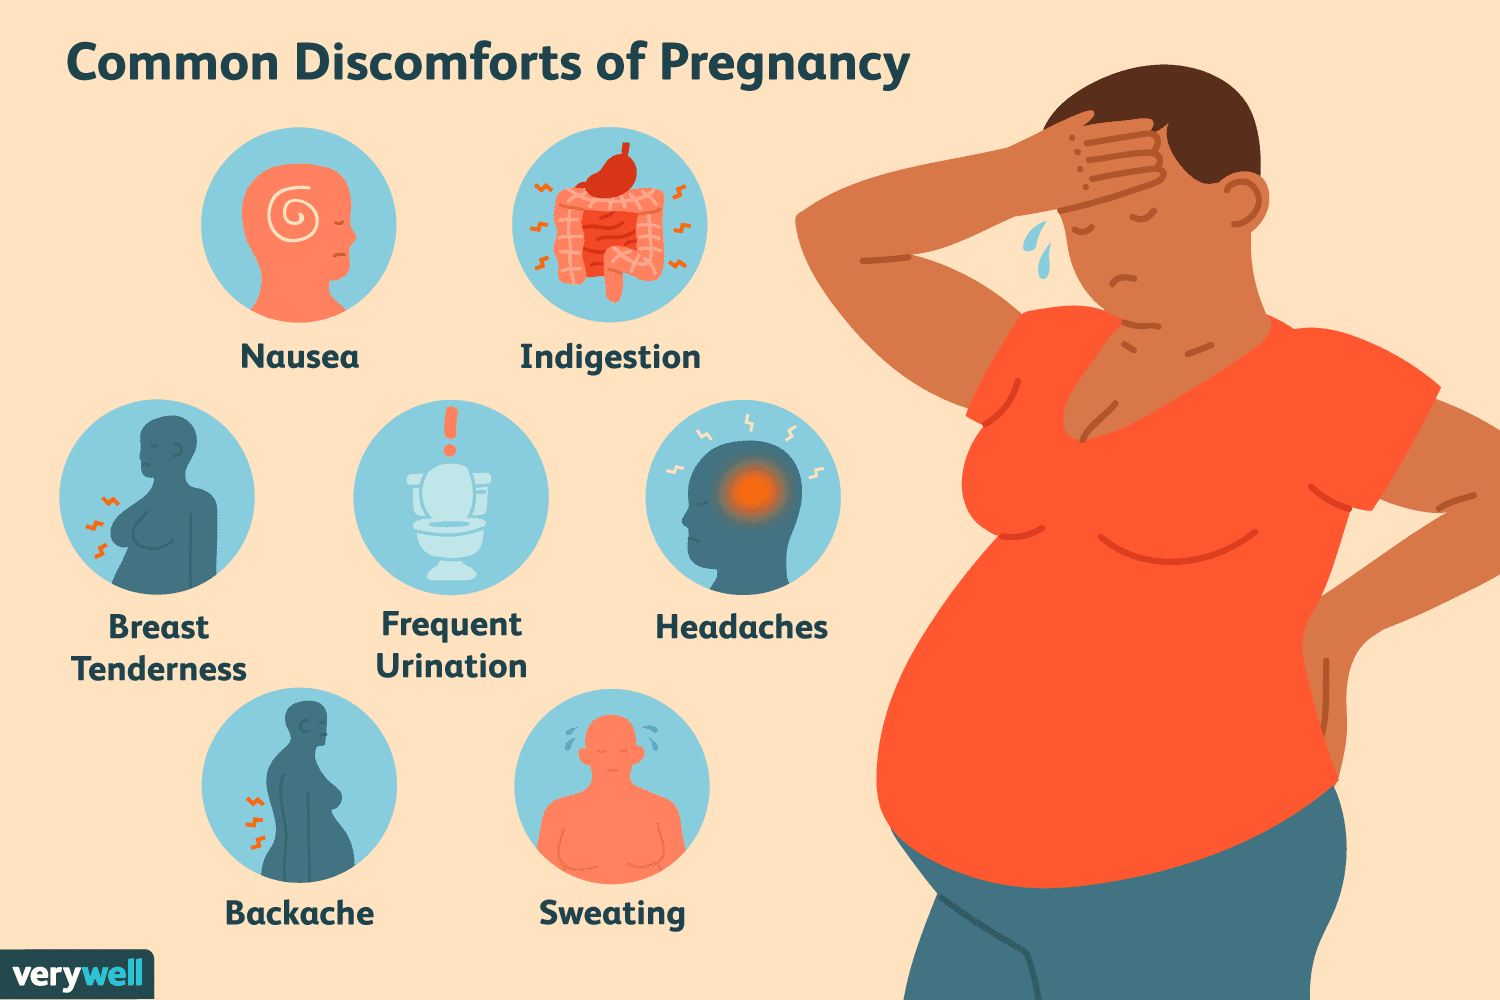 The Common Discomforts of Pregnancy